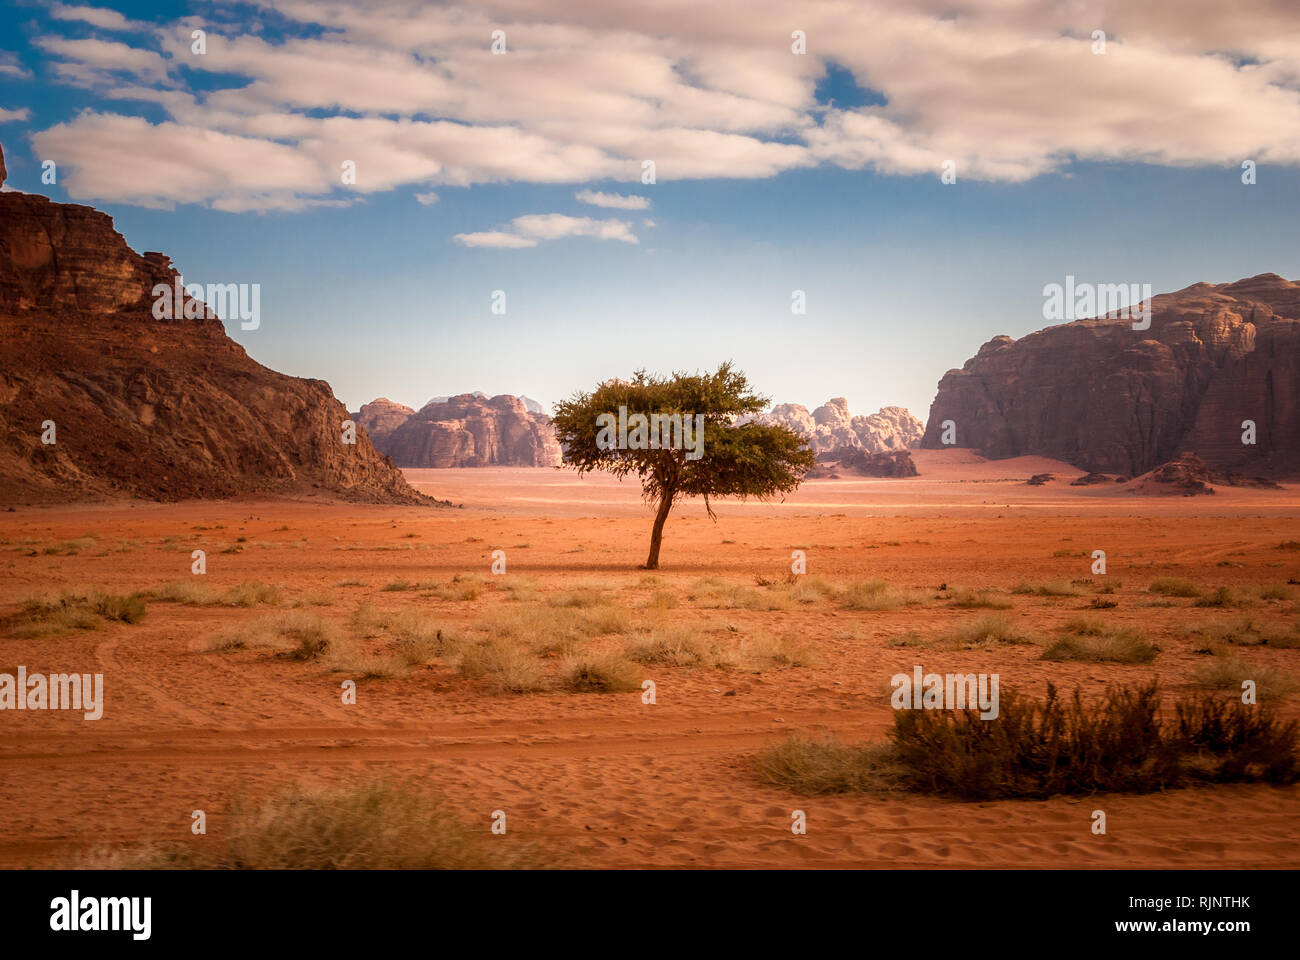 Lonely tree in the middle of the desert of Wadi Rum in Jordan, Middle East Stock Photo